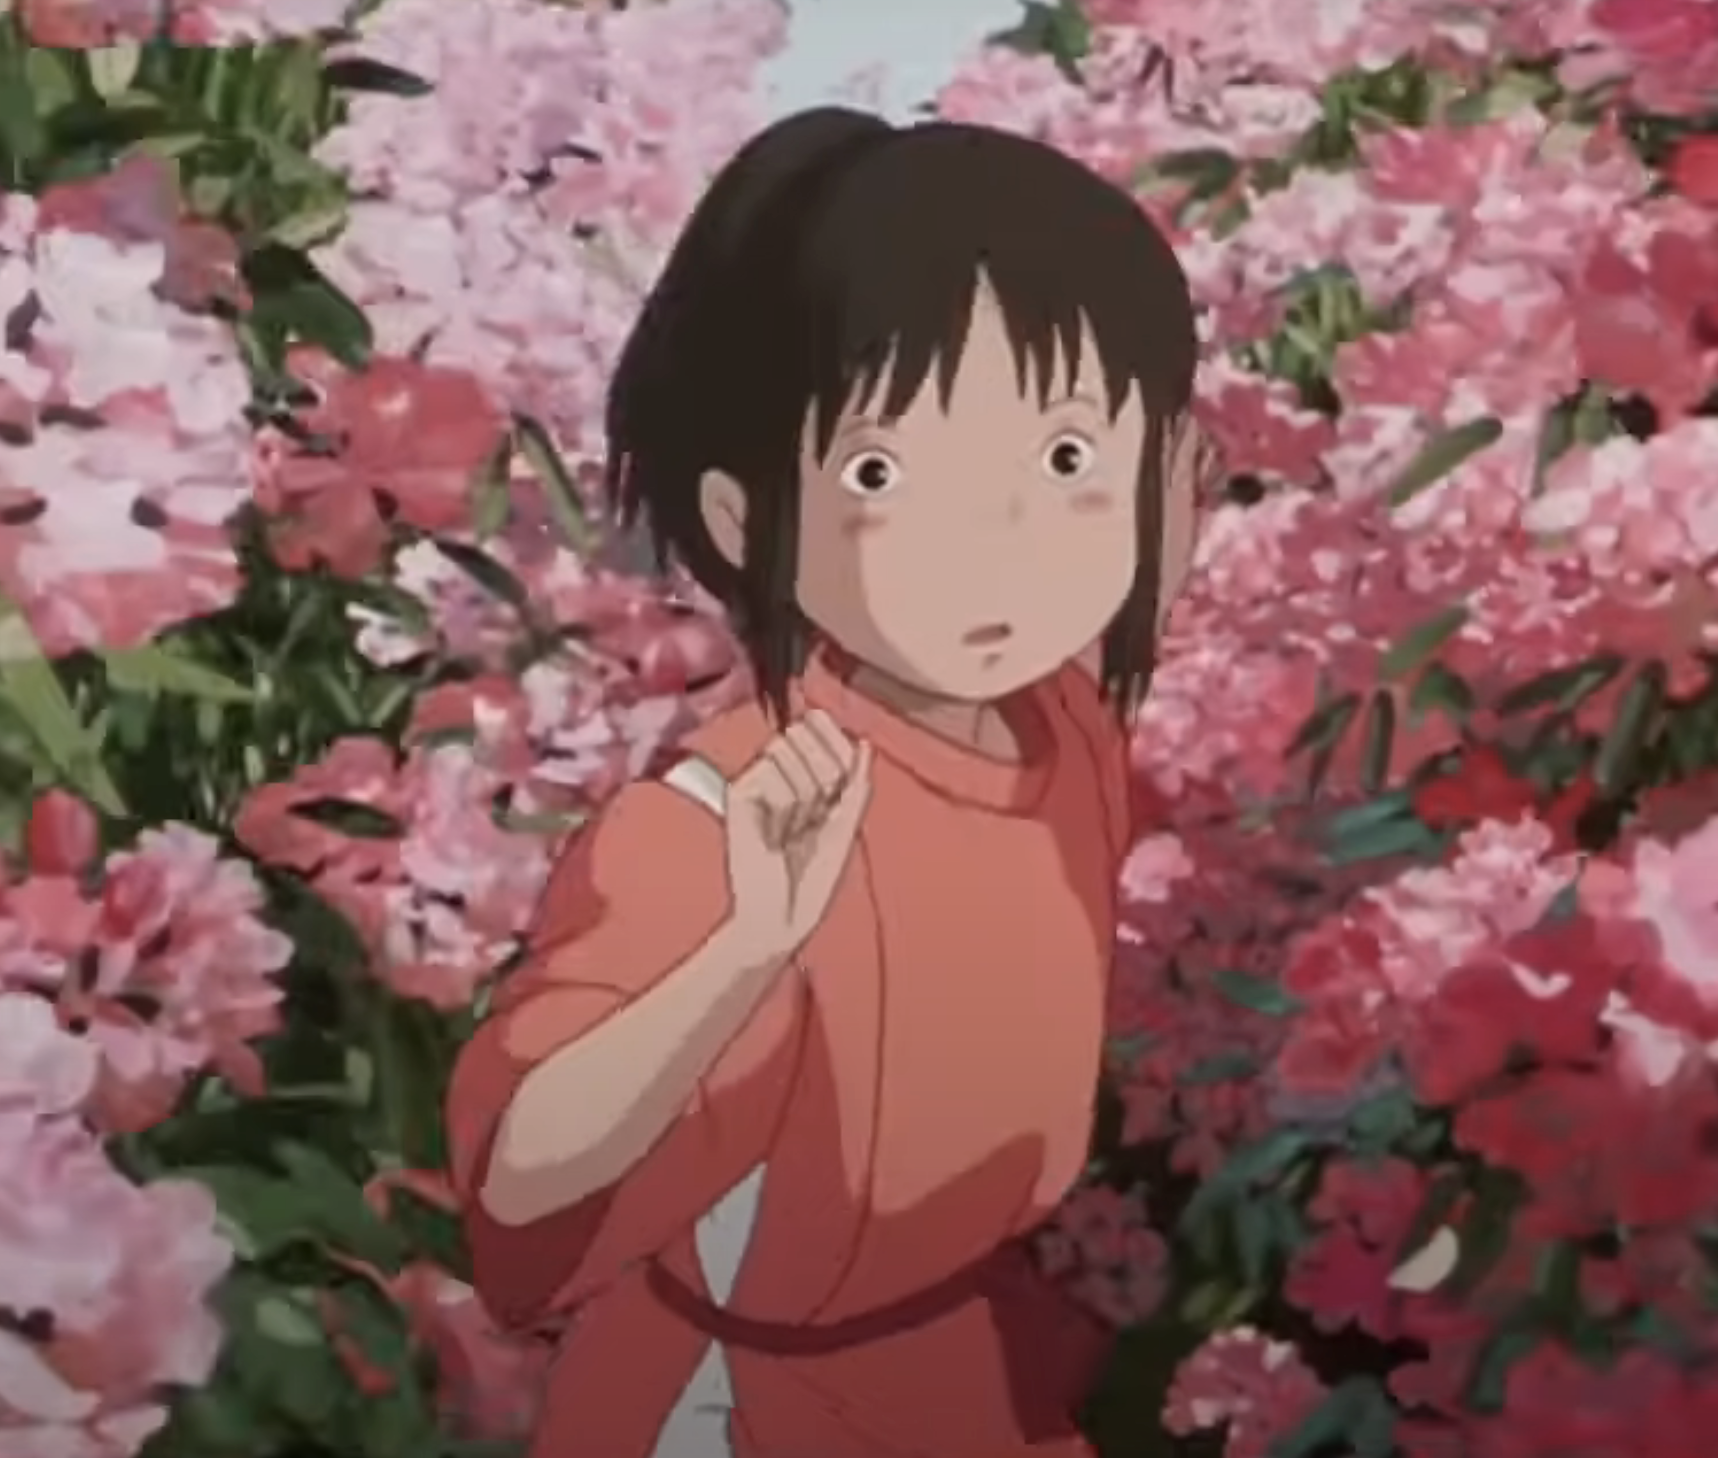 Close-up of animated Chihiro against a floral backdrop